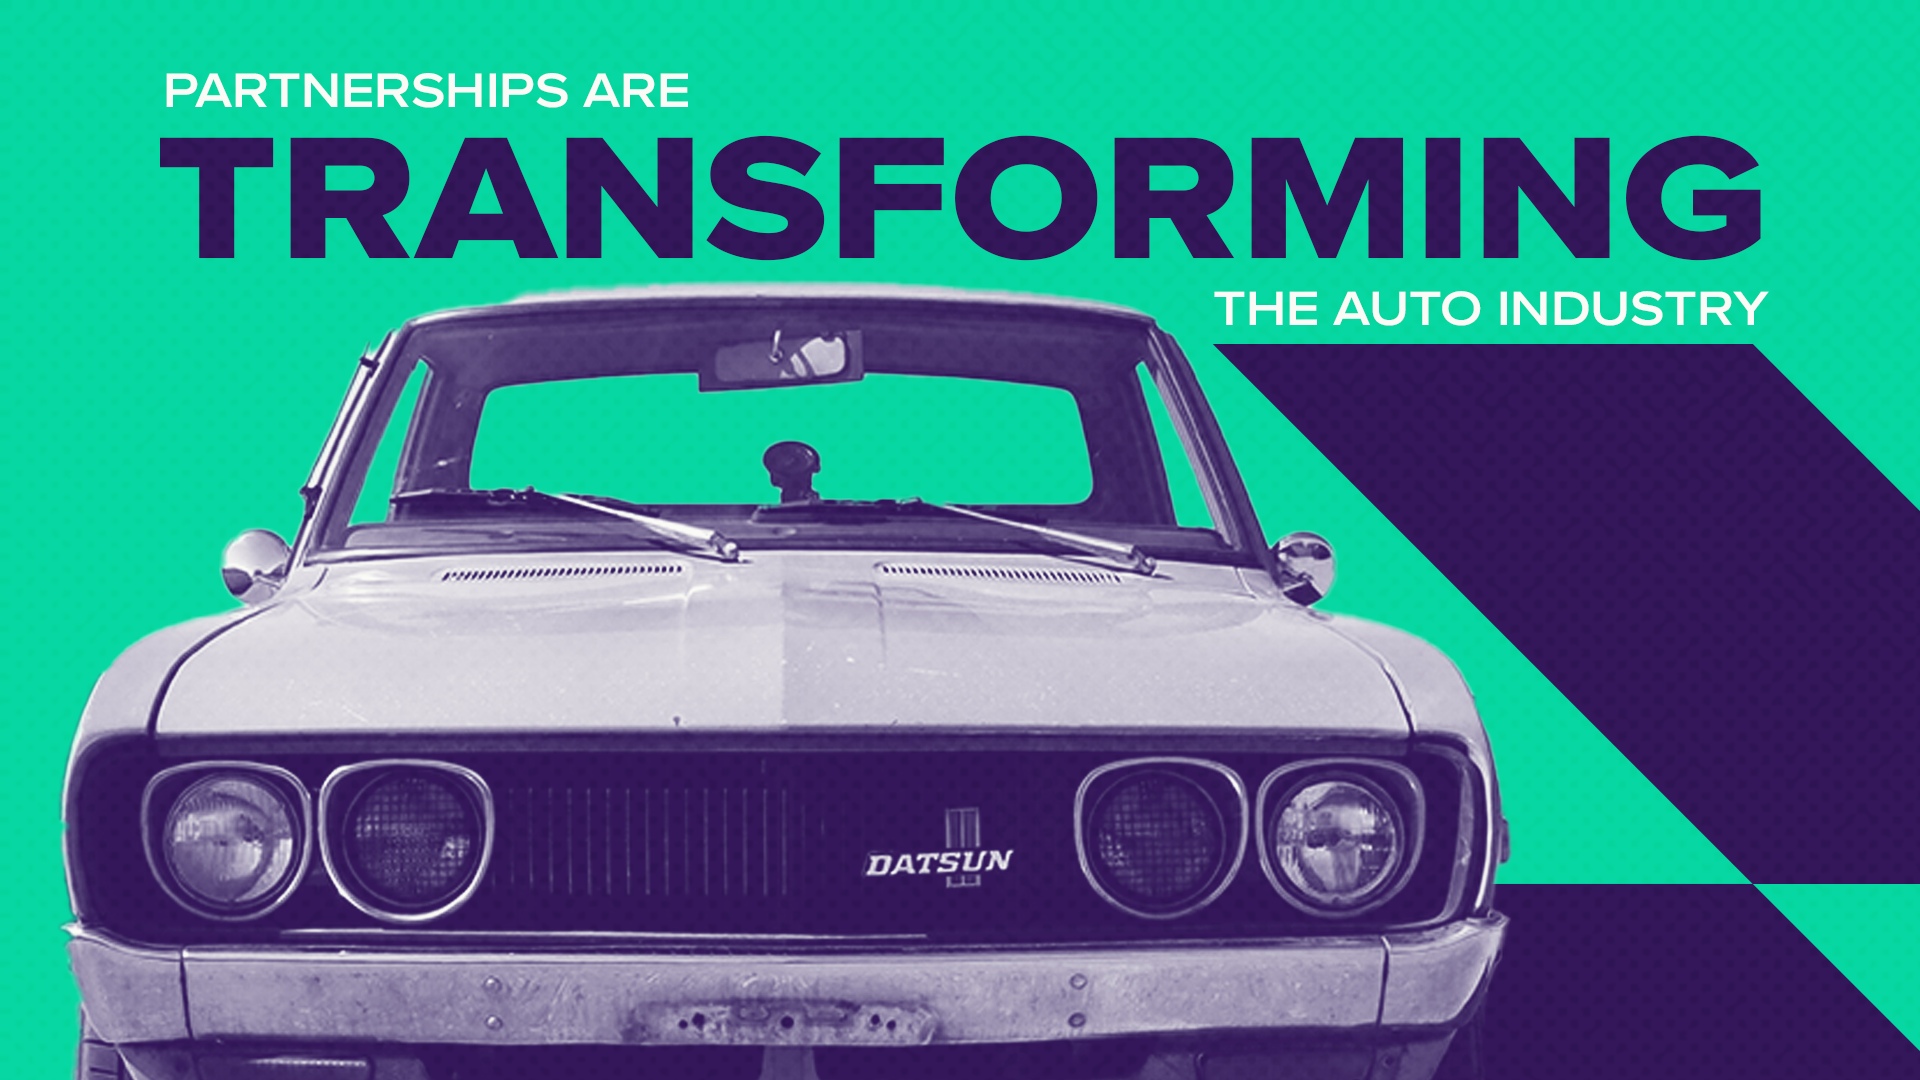 Partnerships are Transforming the Auto Industry